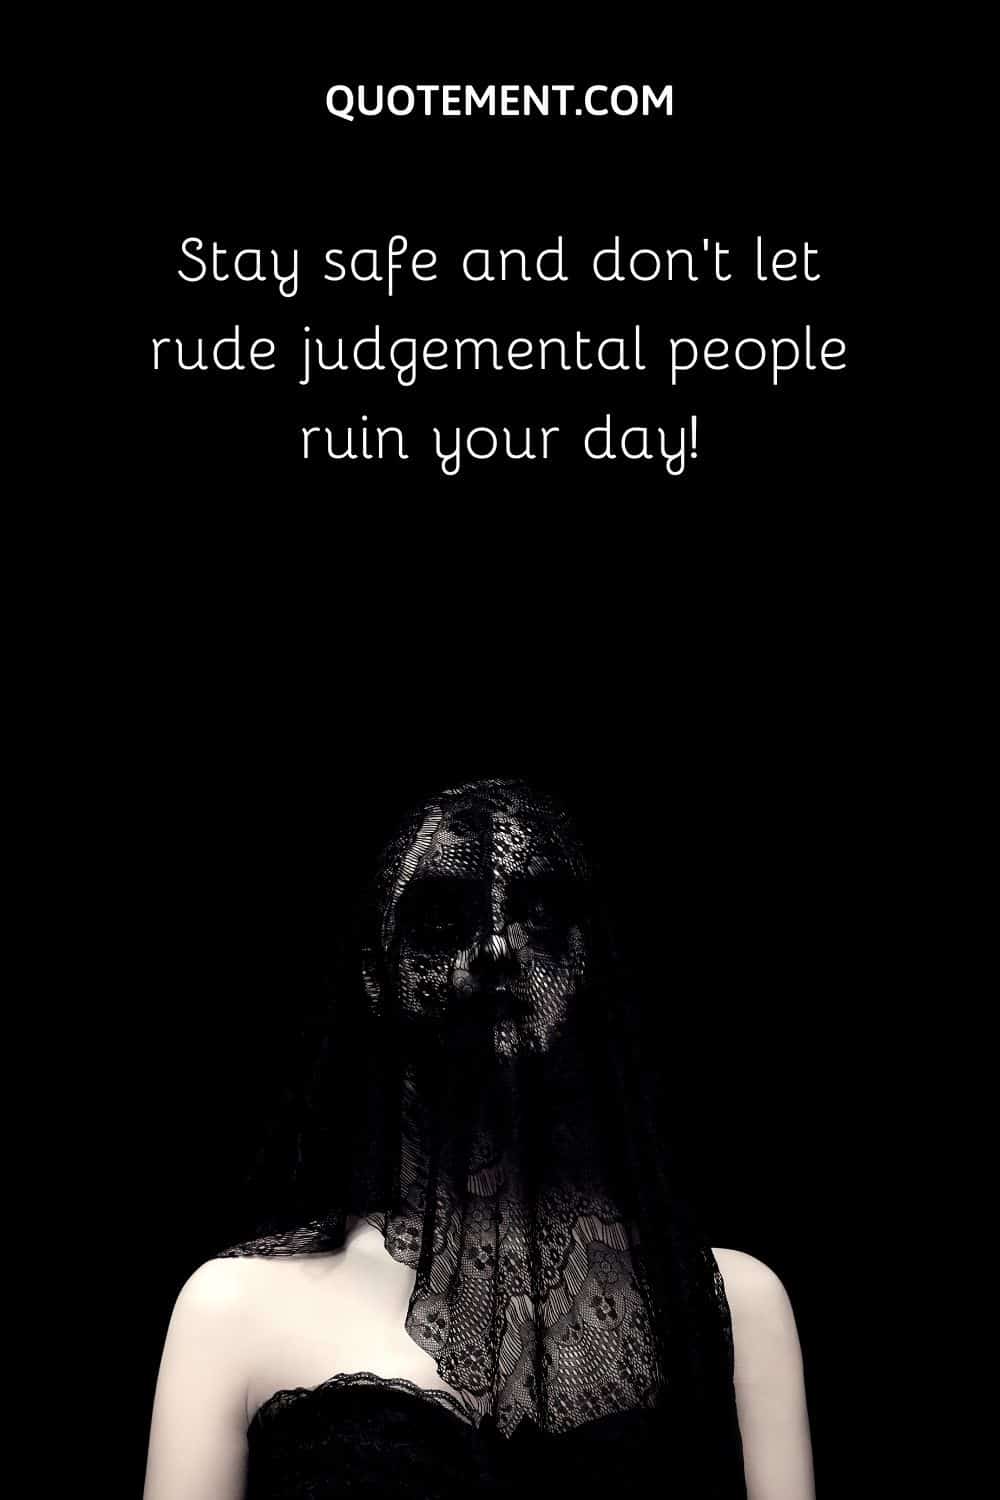 Stay safe and don’t let rude judgemental people ruin your day